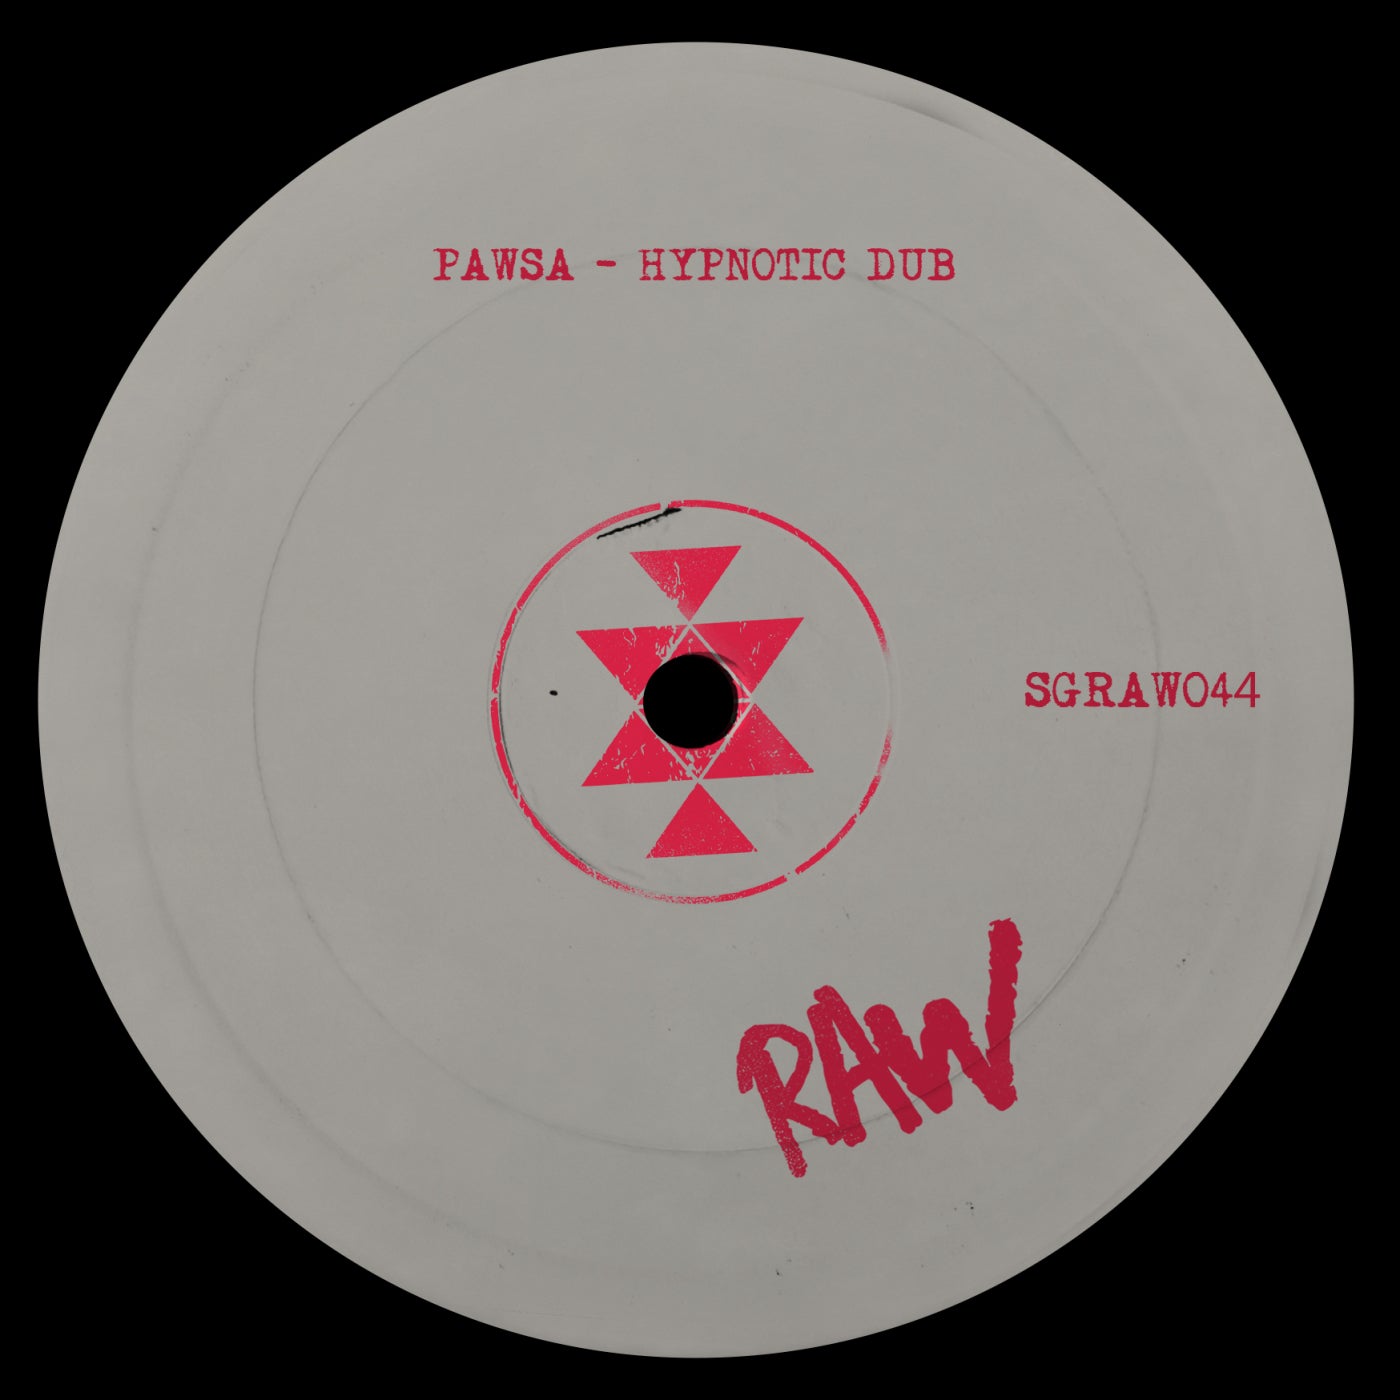 PAWSA – WHAT THE ACTUAL FUNK [PAWZ028]